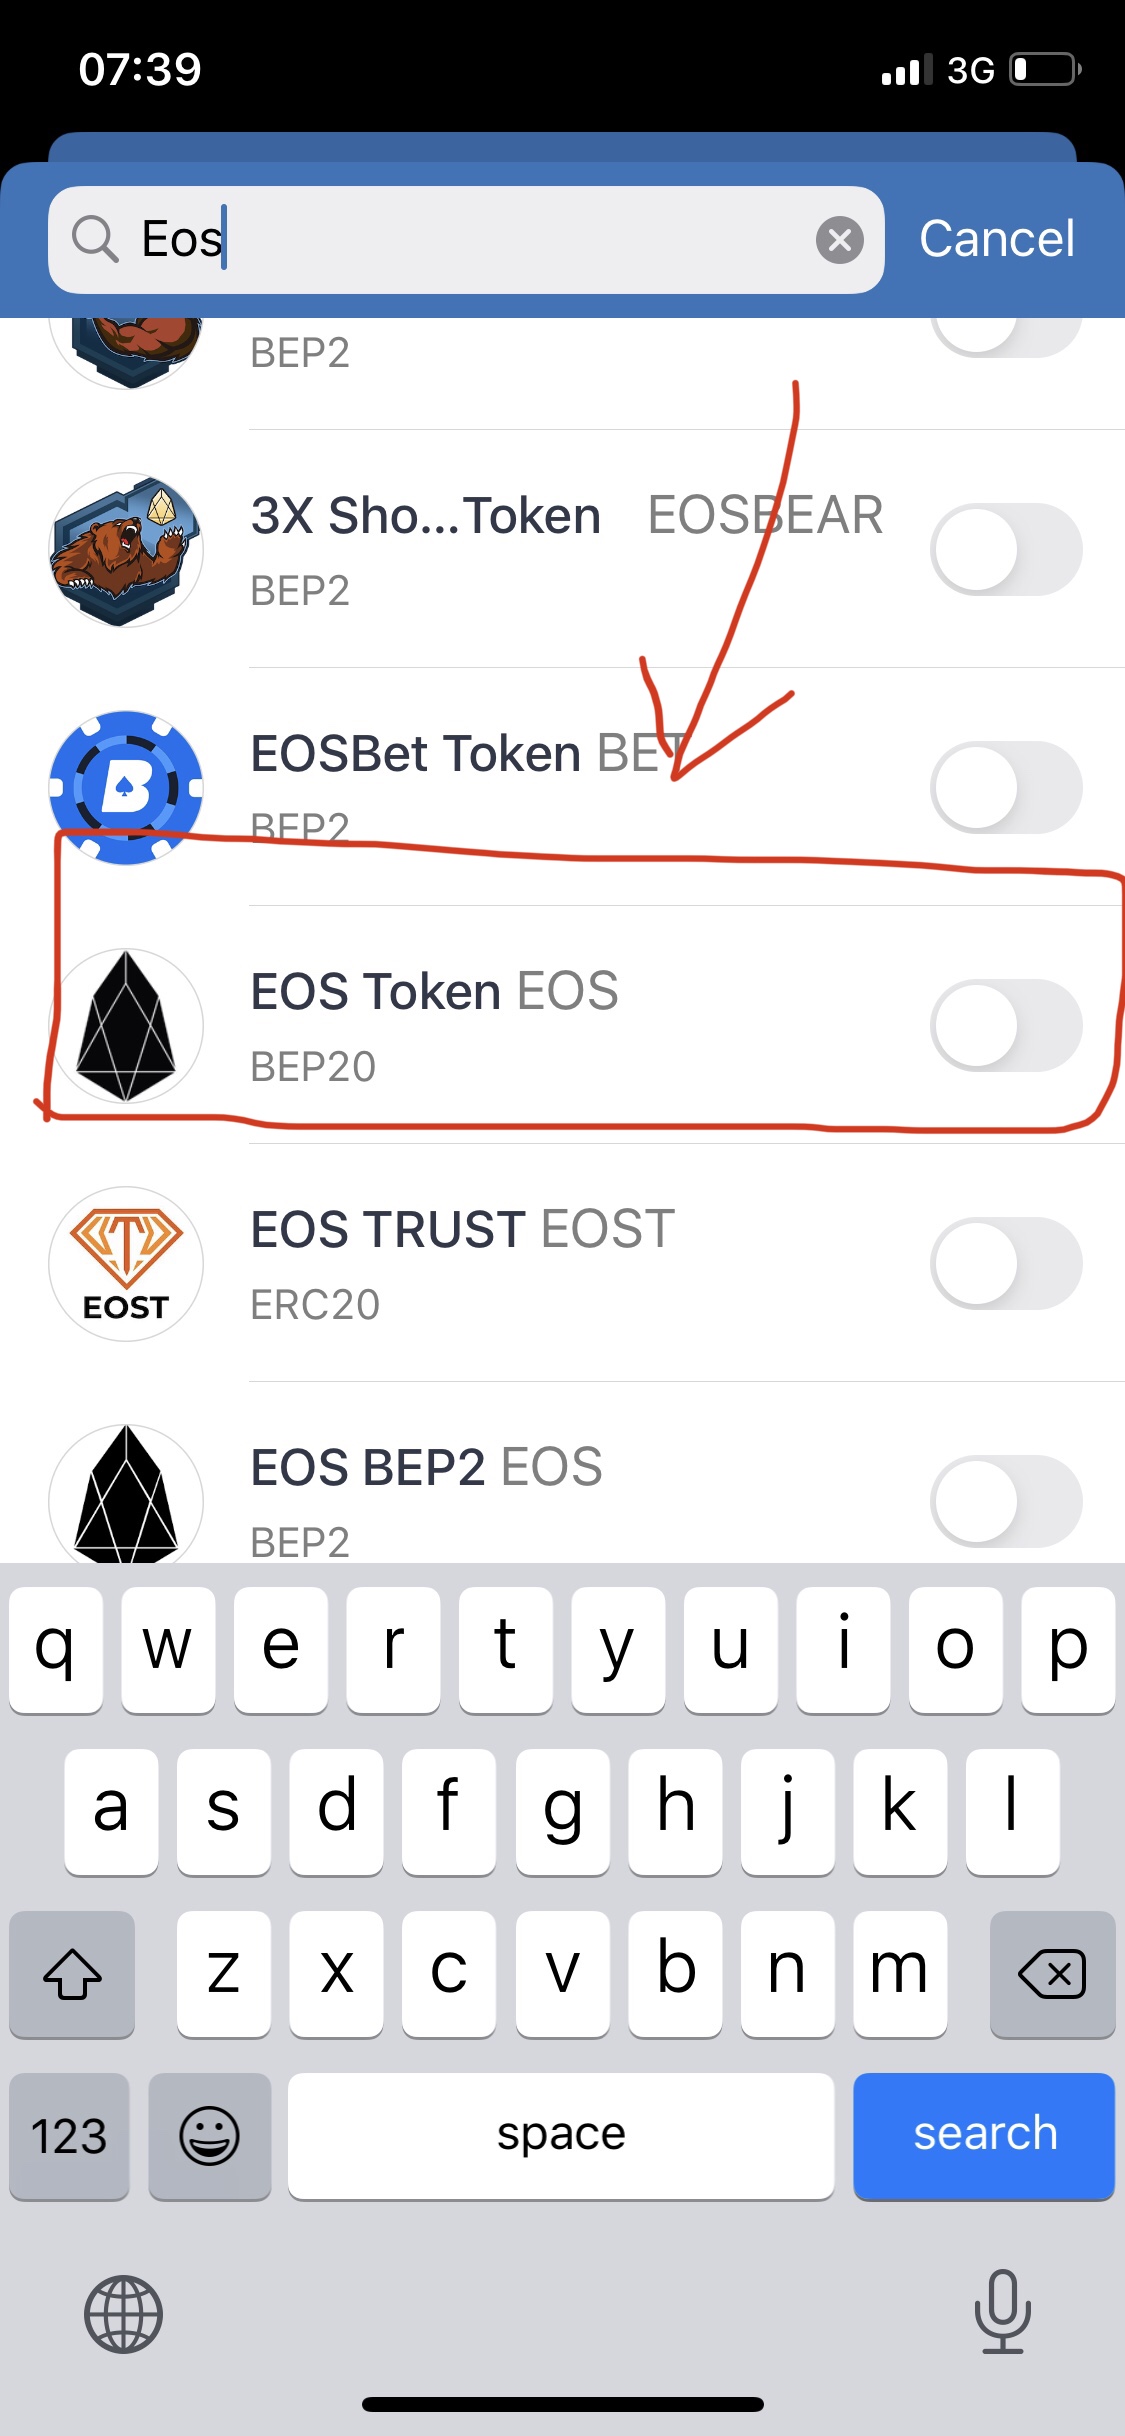 to contact Trust? - English Wallet